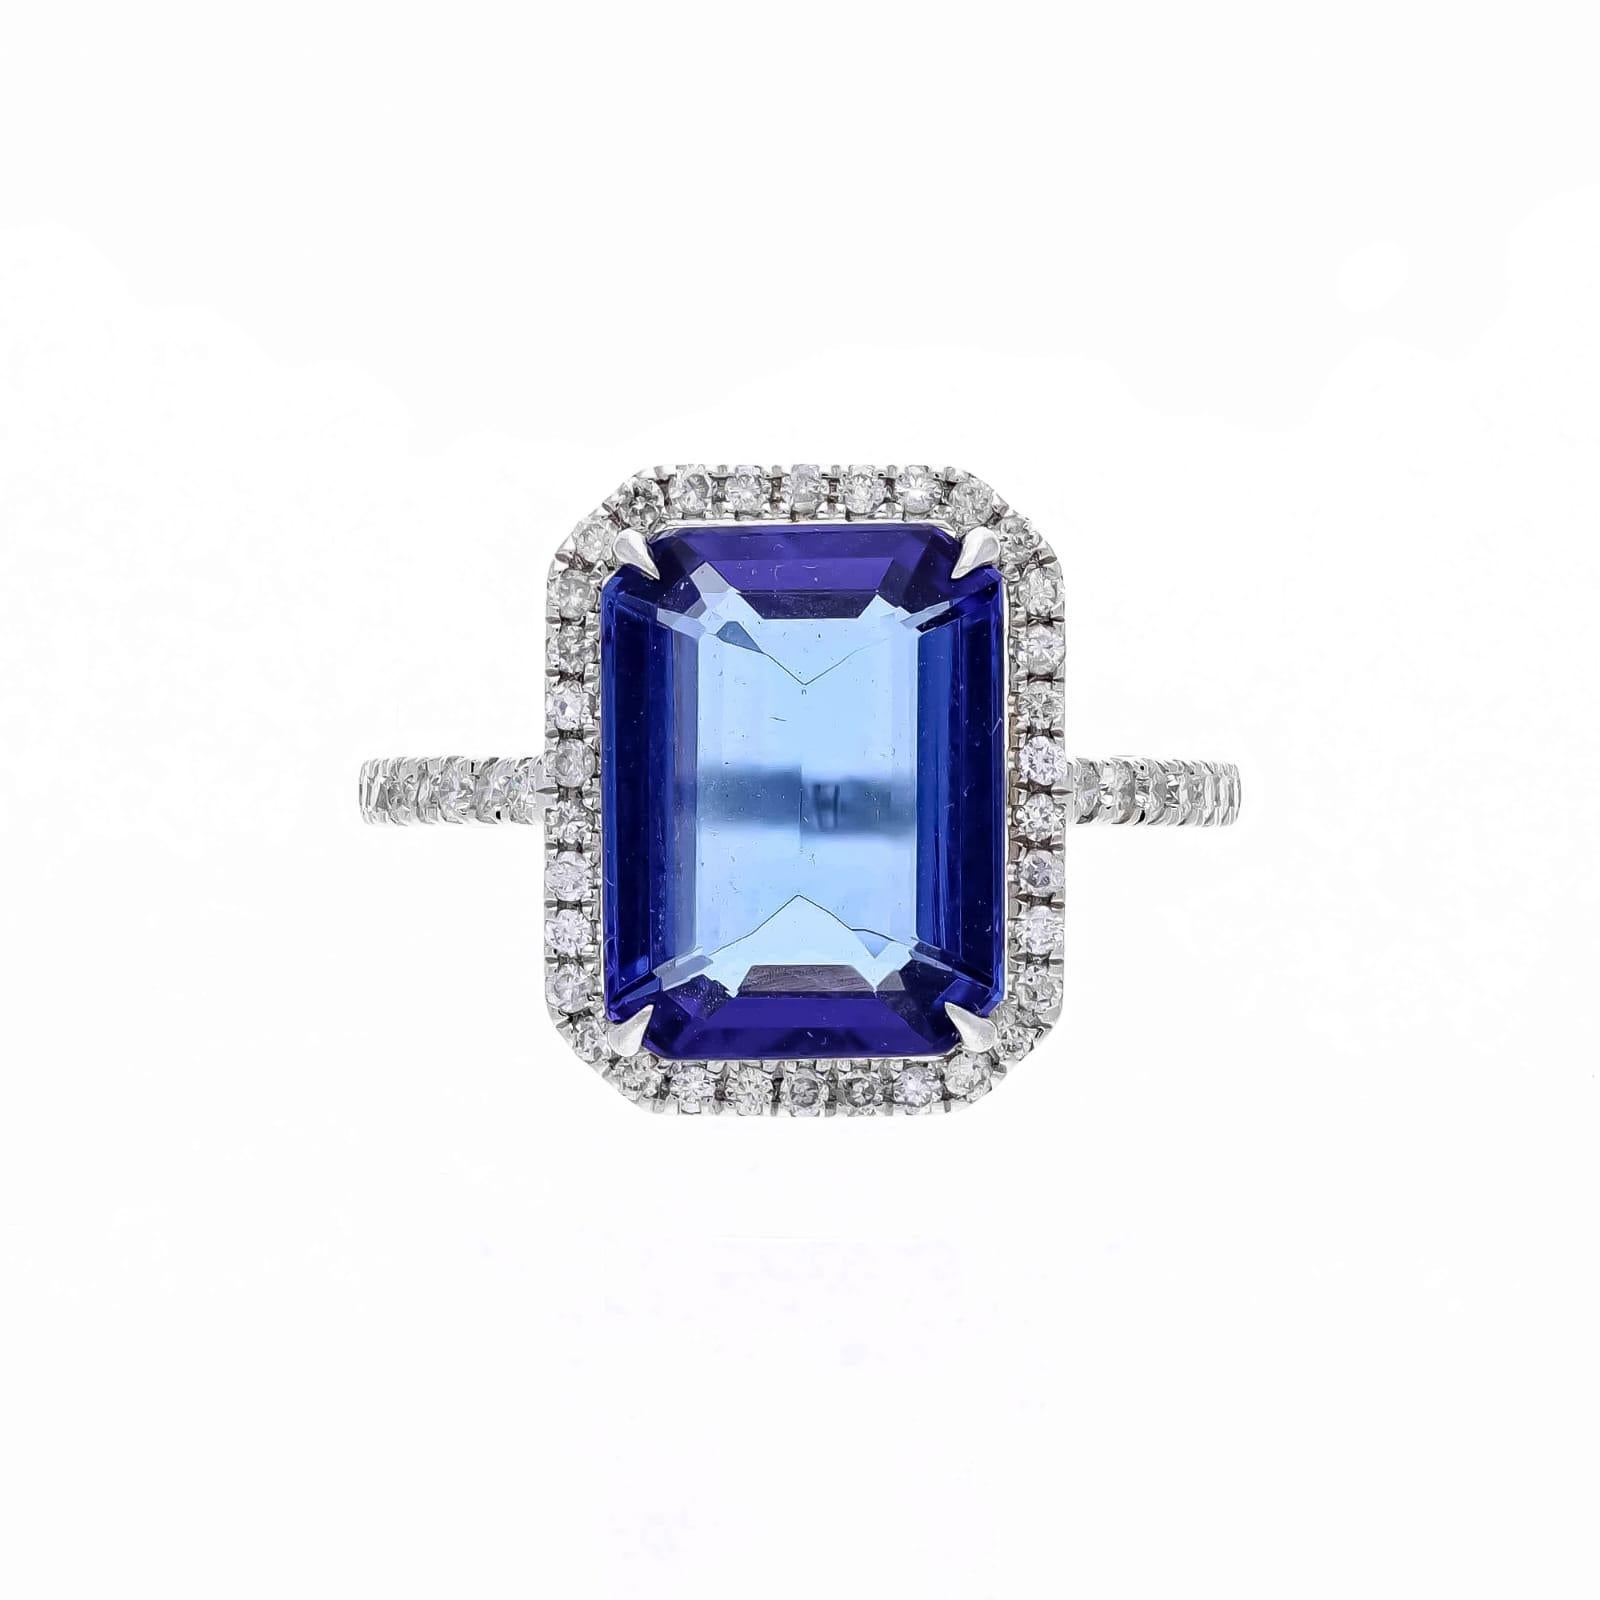 Superb tanzanite stone with best color and clarity ring perfect for your outing.

diamonds ;
0.69 carats 
Tanzanite  ( 5.56 carats)
gold ( 2.80 gms)



It’s very hard to capture the true color and luster of the stone, I have tried to add pictures